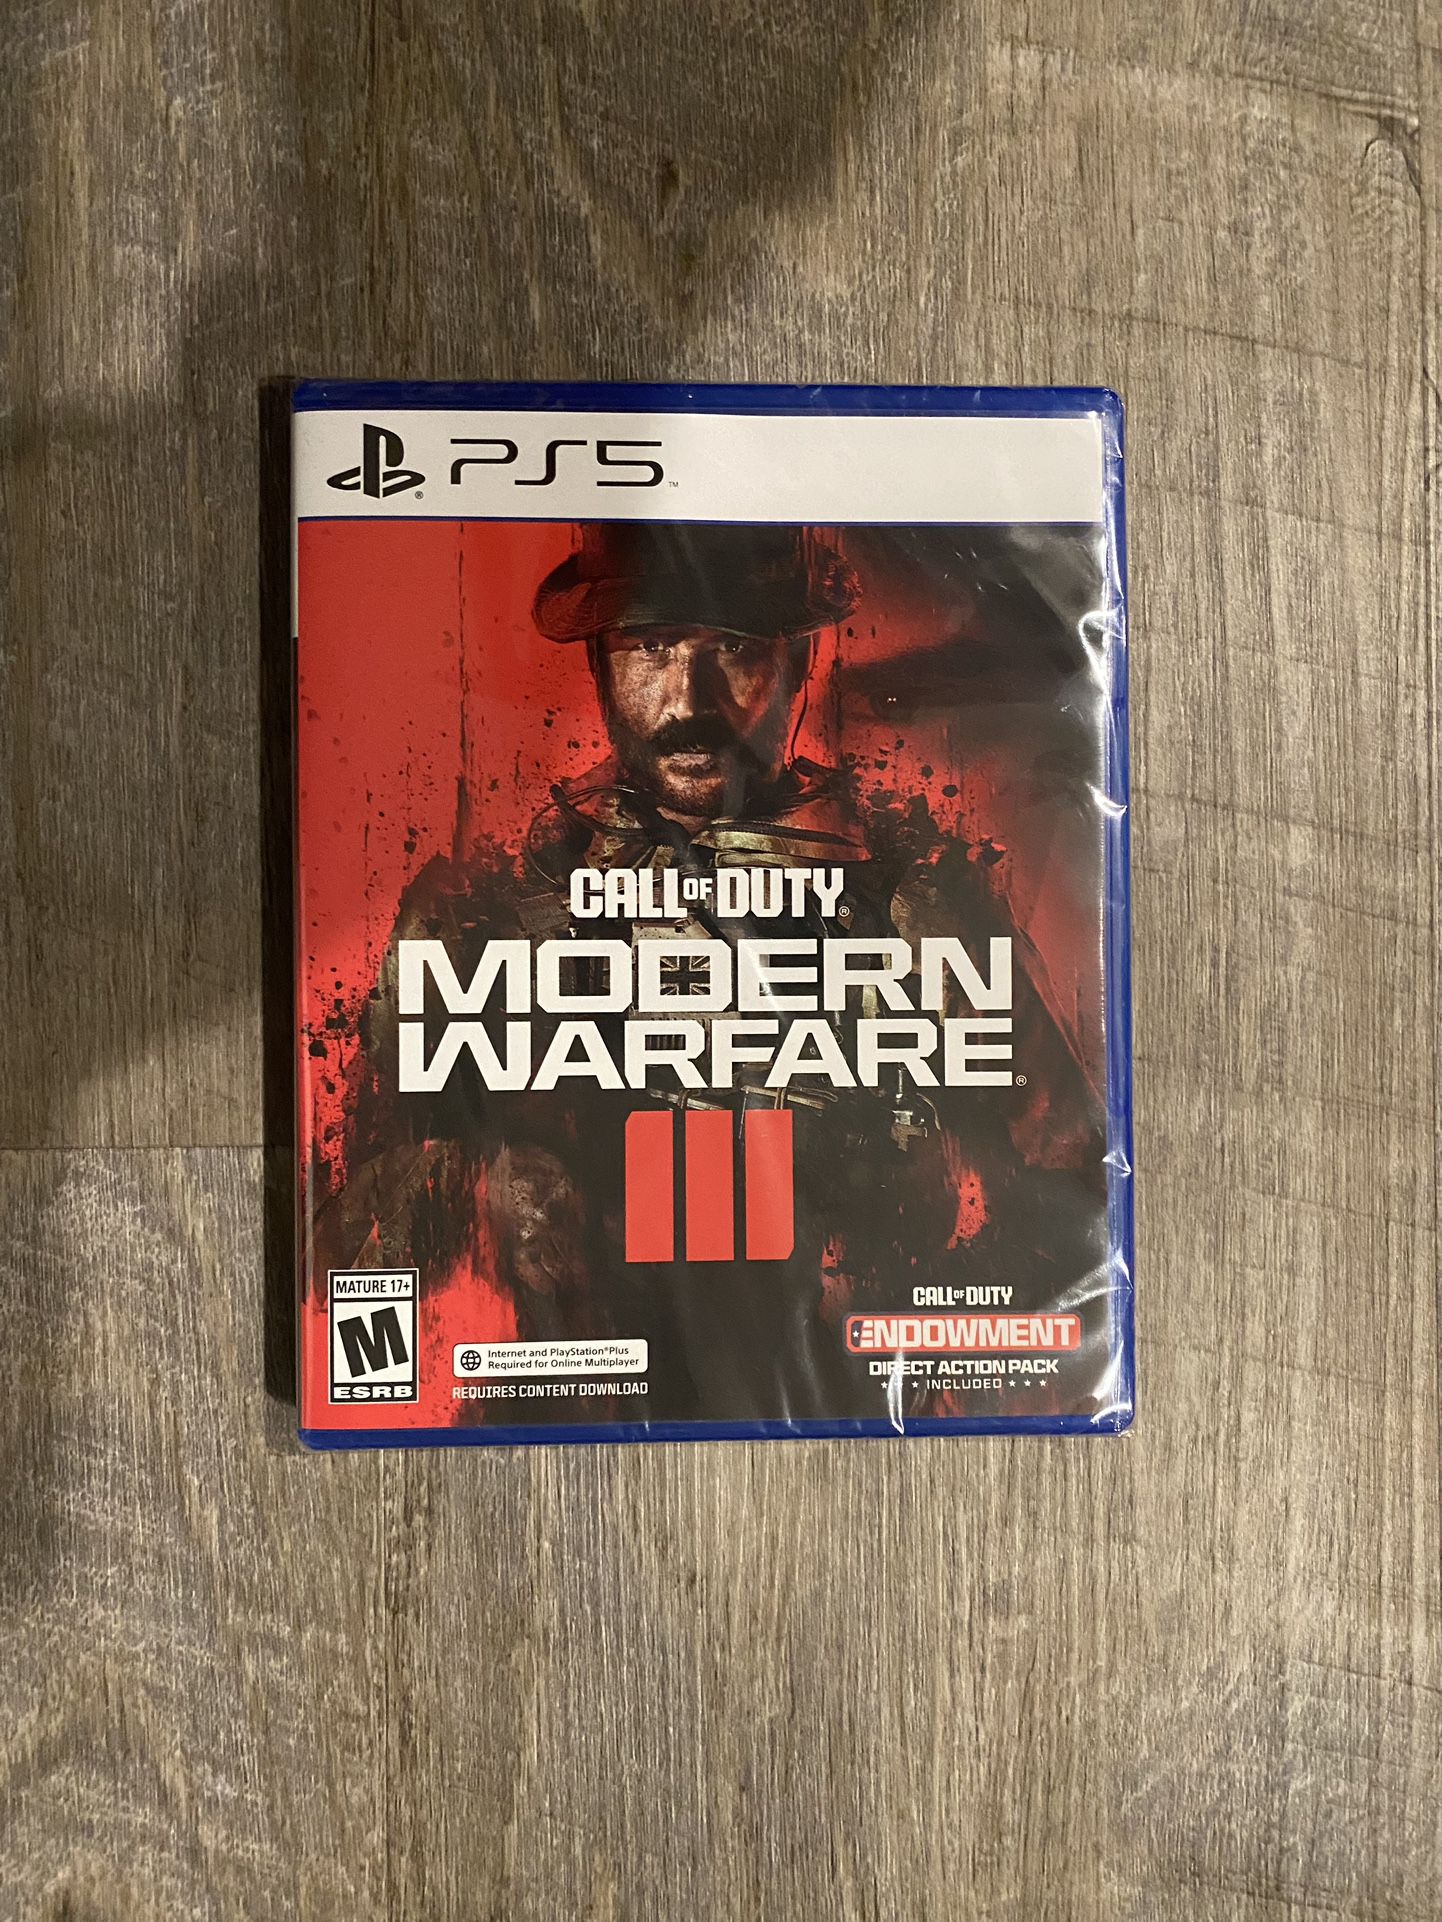 In Hand, Brand New, Never Opened Factory Sealed PS5 Call of Duty Modern Warfare 3 - Video Game